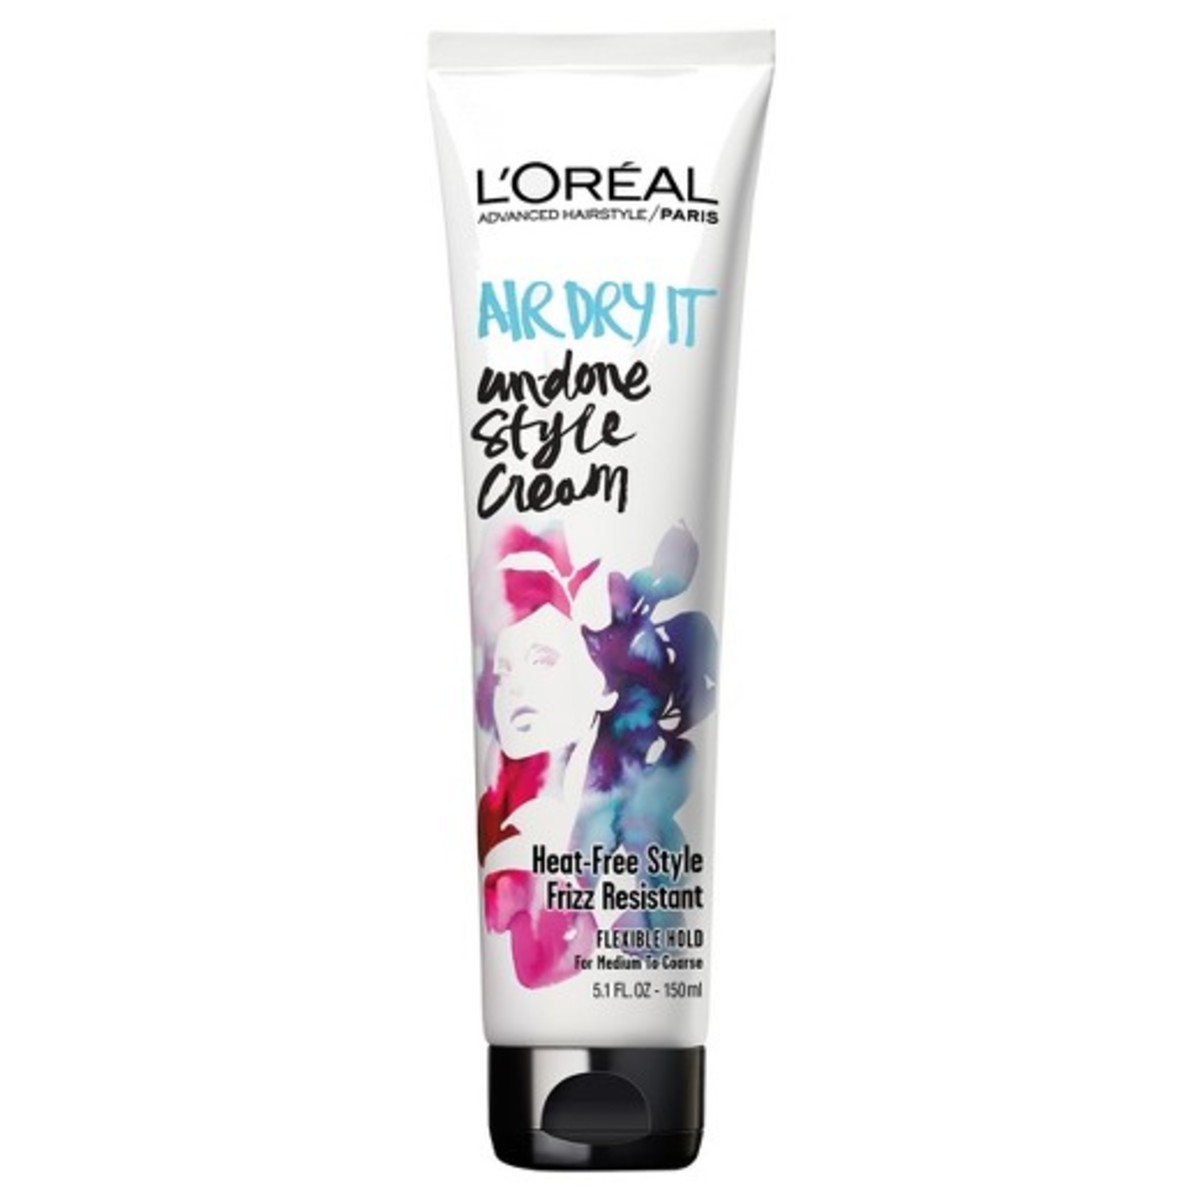 L'Oréal Advanced Hairstyle Air Dry It Undone Hairstyle Cream, $4.99, available at Ulta.